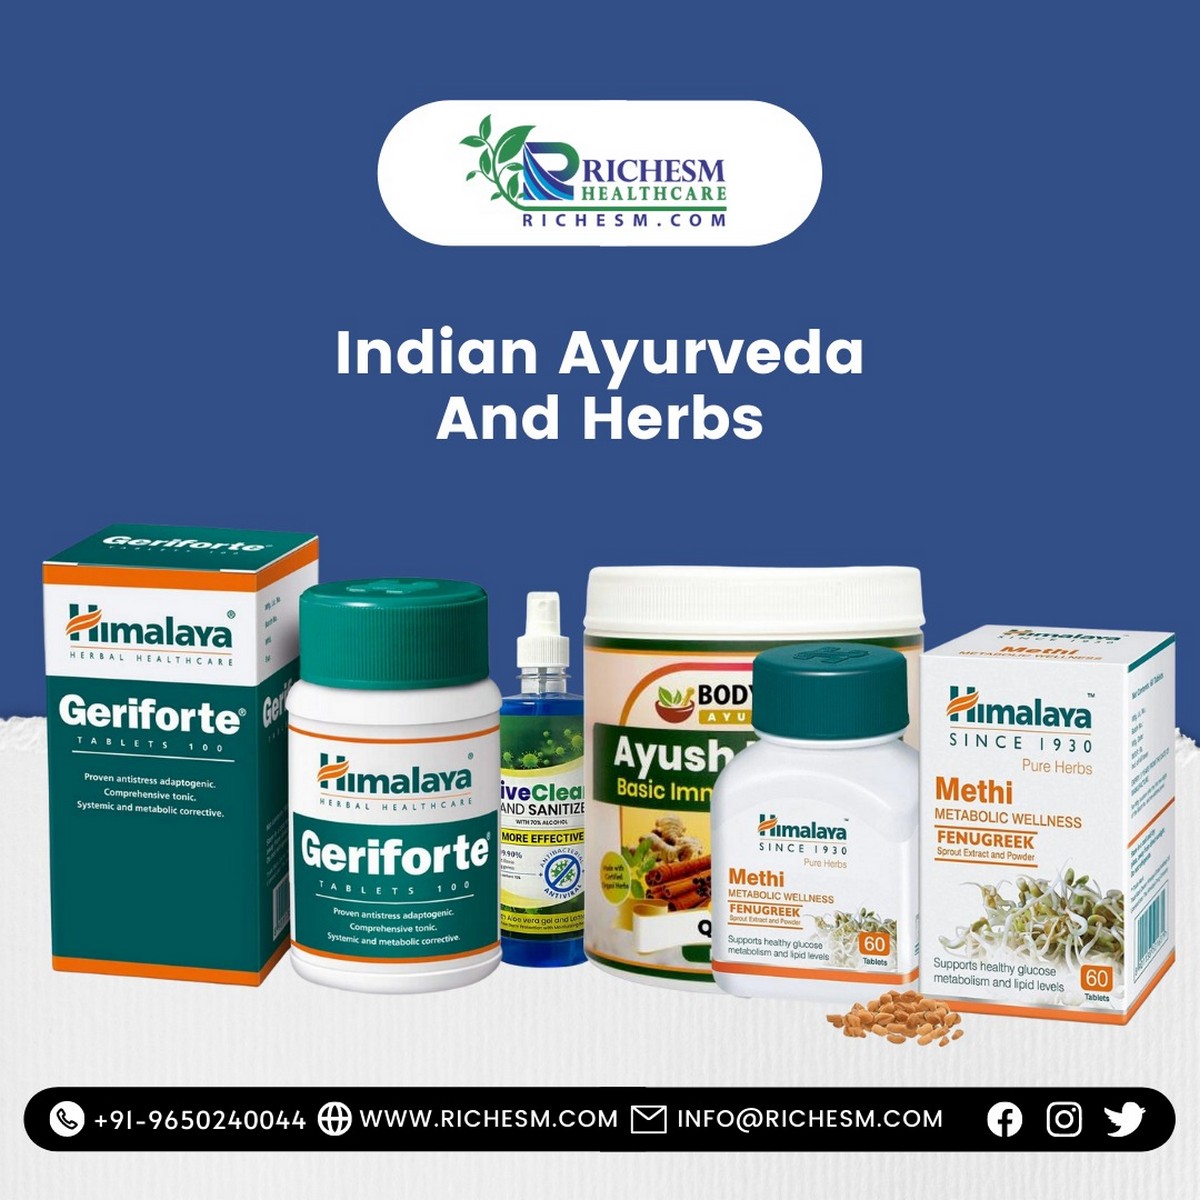 Indian Ayurveda And Herbs